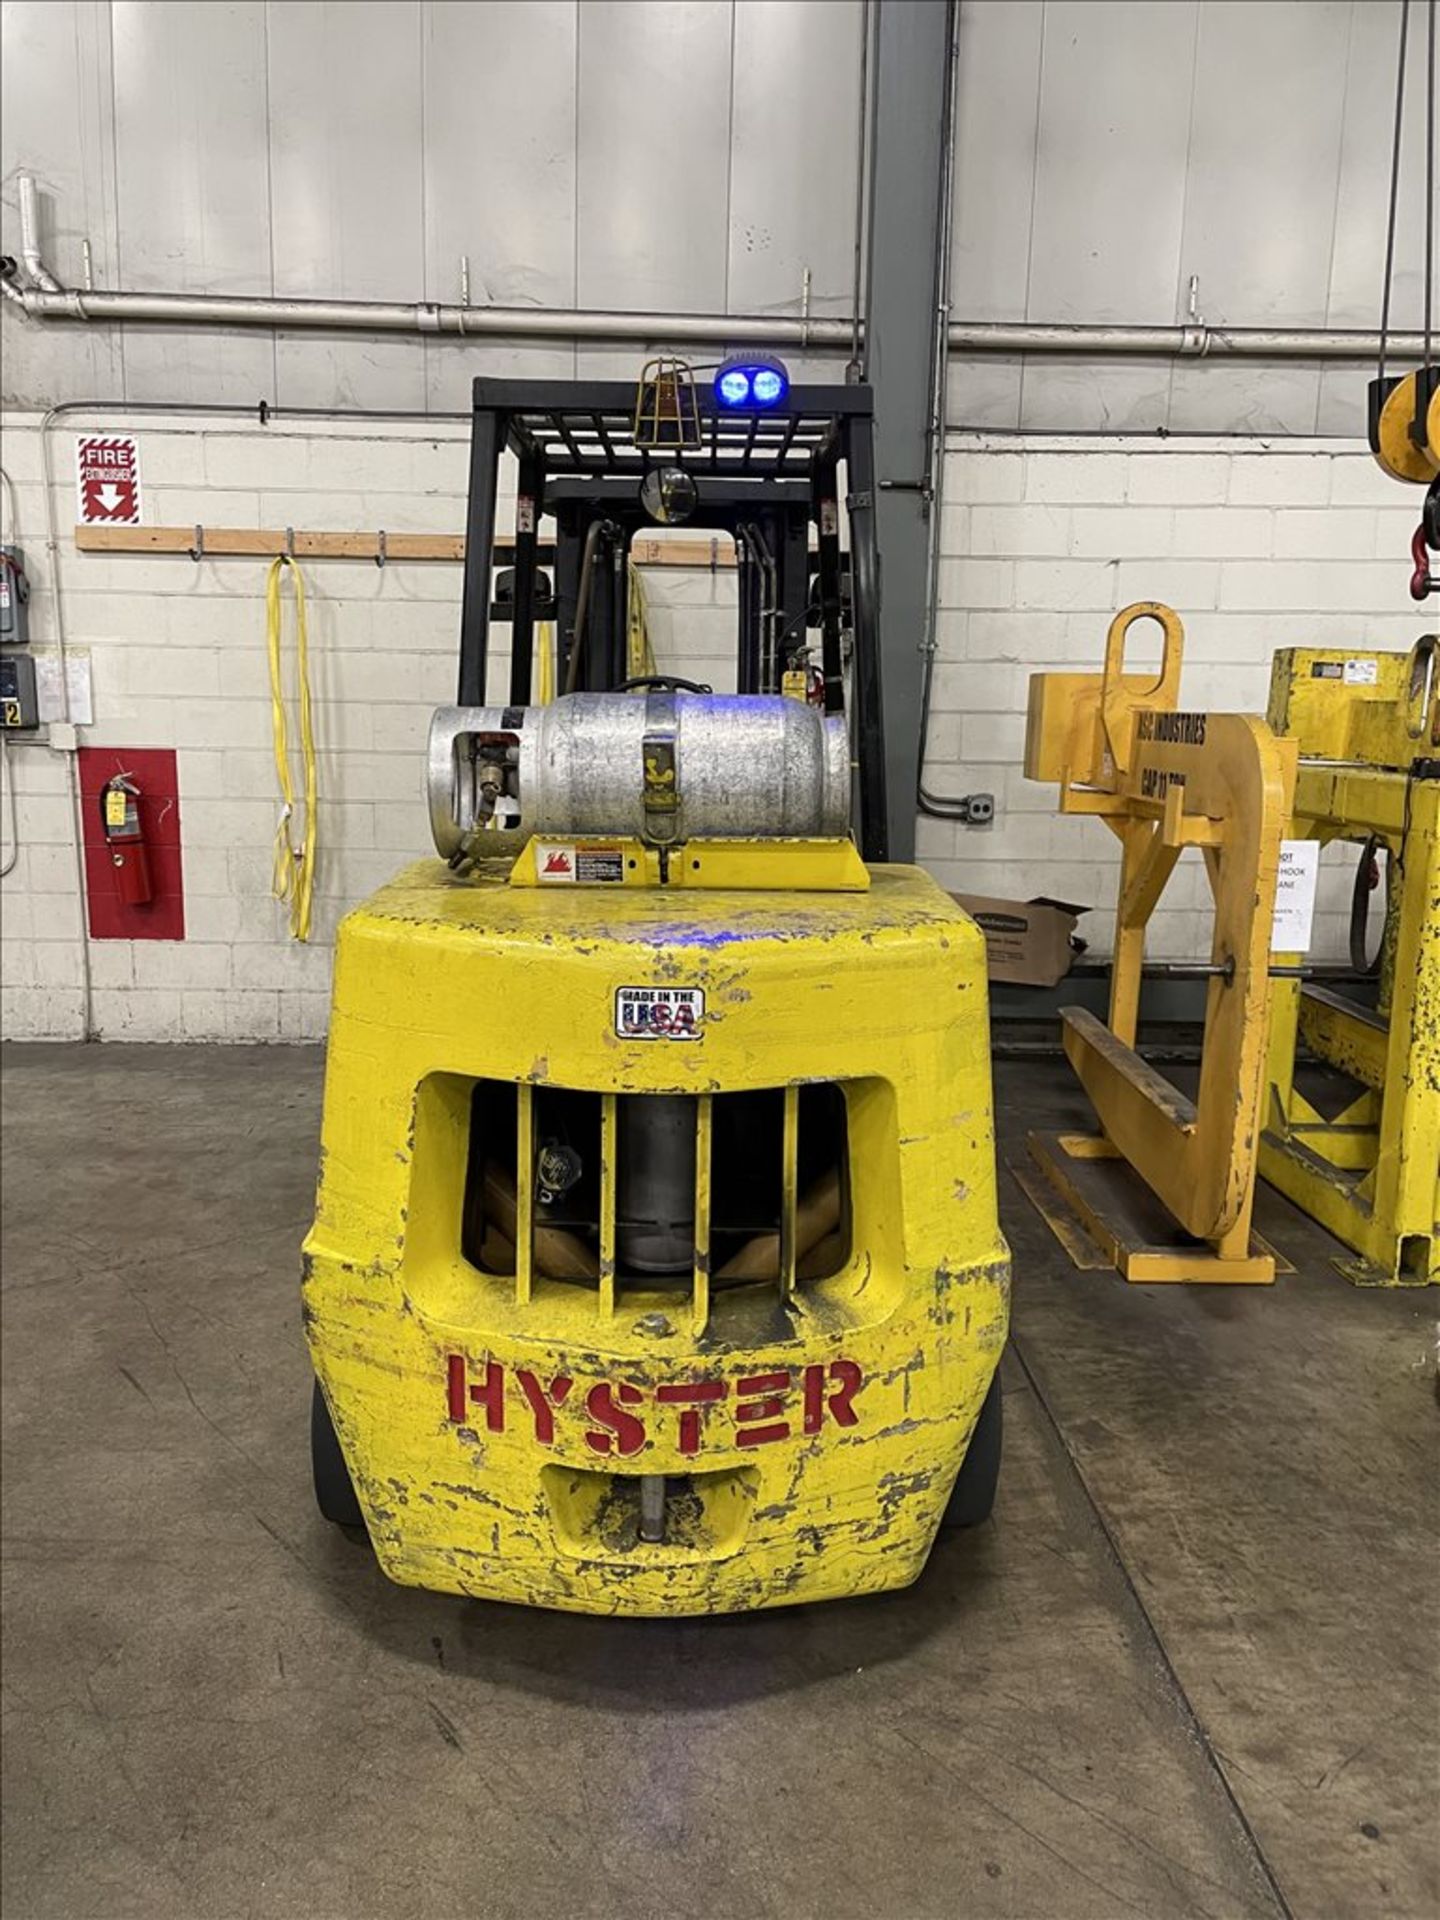 HYSTER S120XL 12,000 lb LP Forklift, s/n D004V03680L, 168" Load Height (Located in Wood Dale, IL) - Image 3 of 8